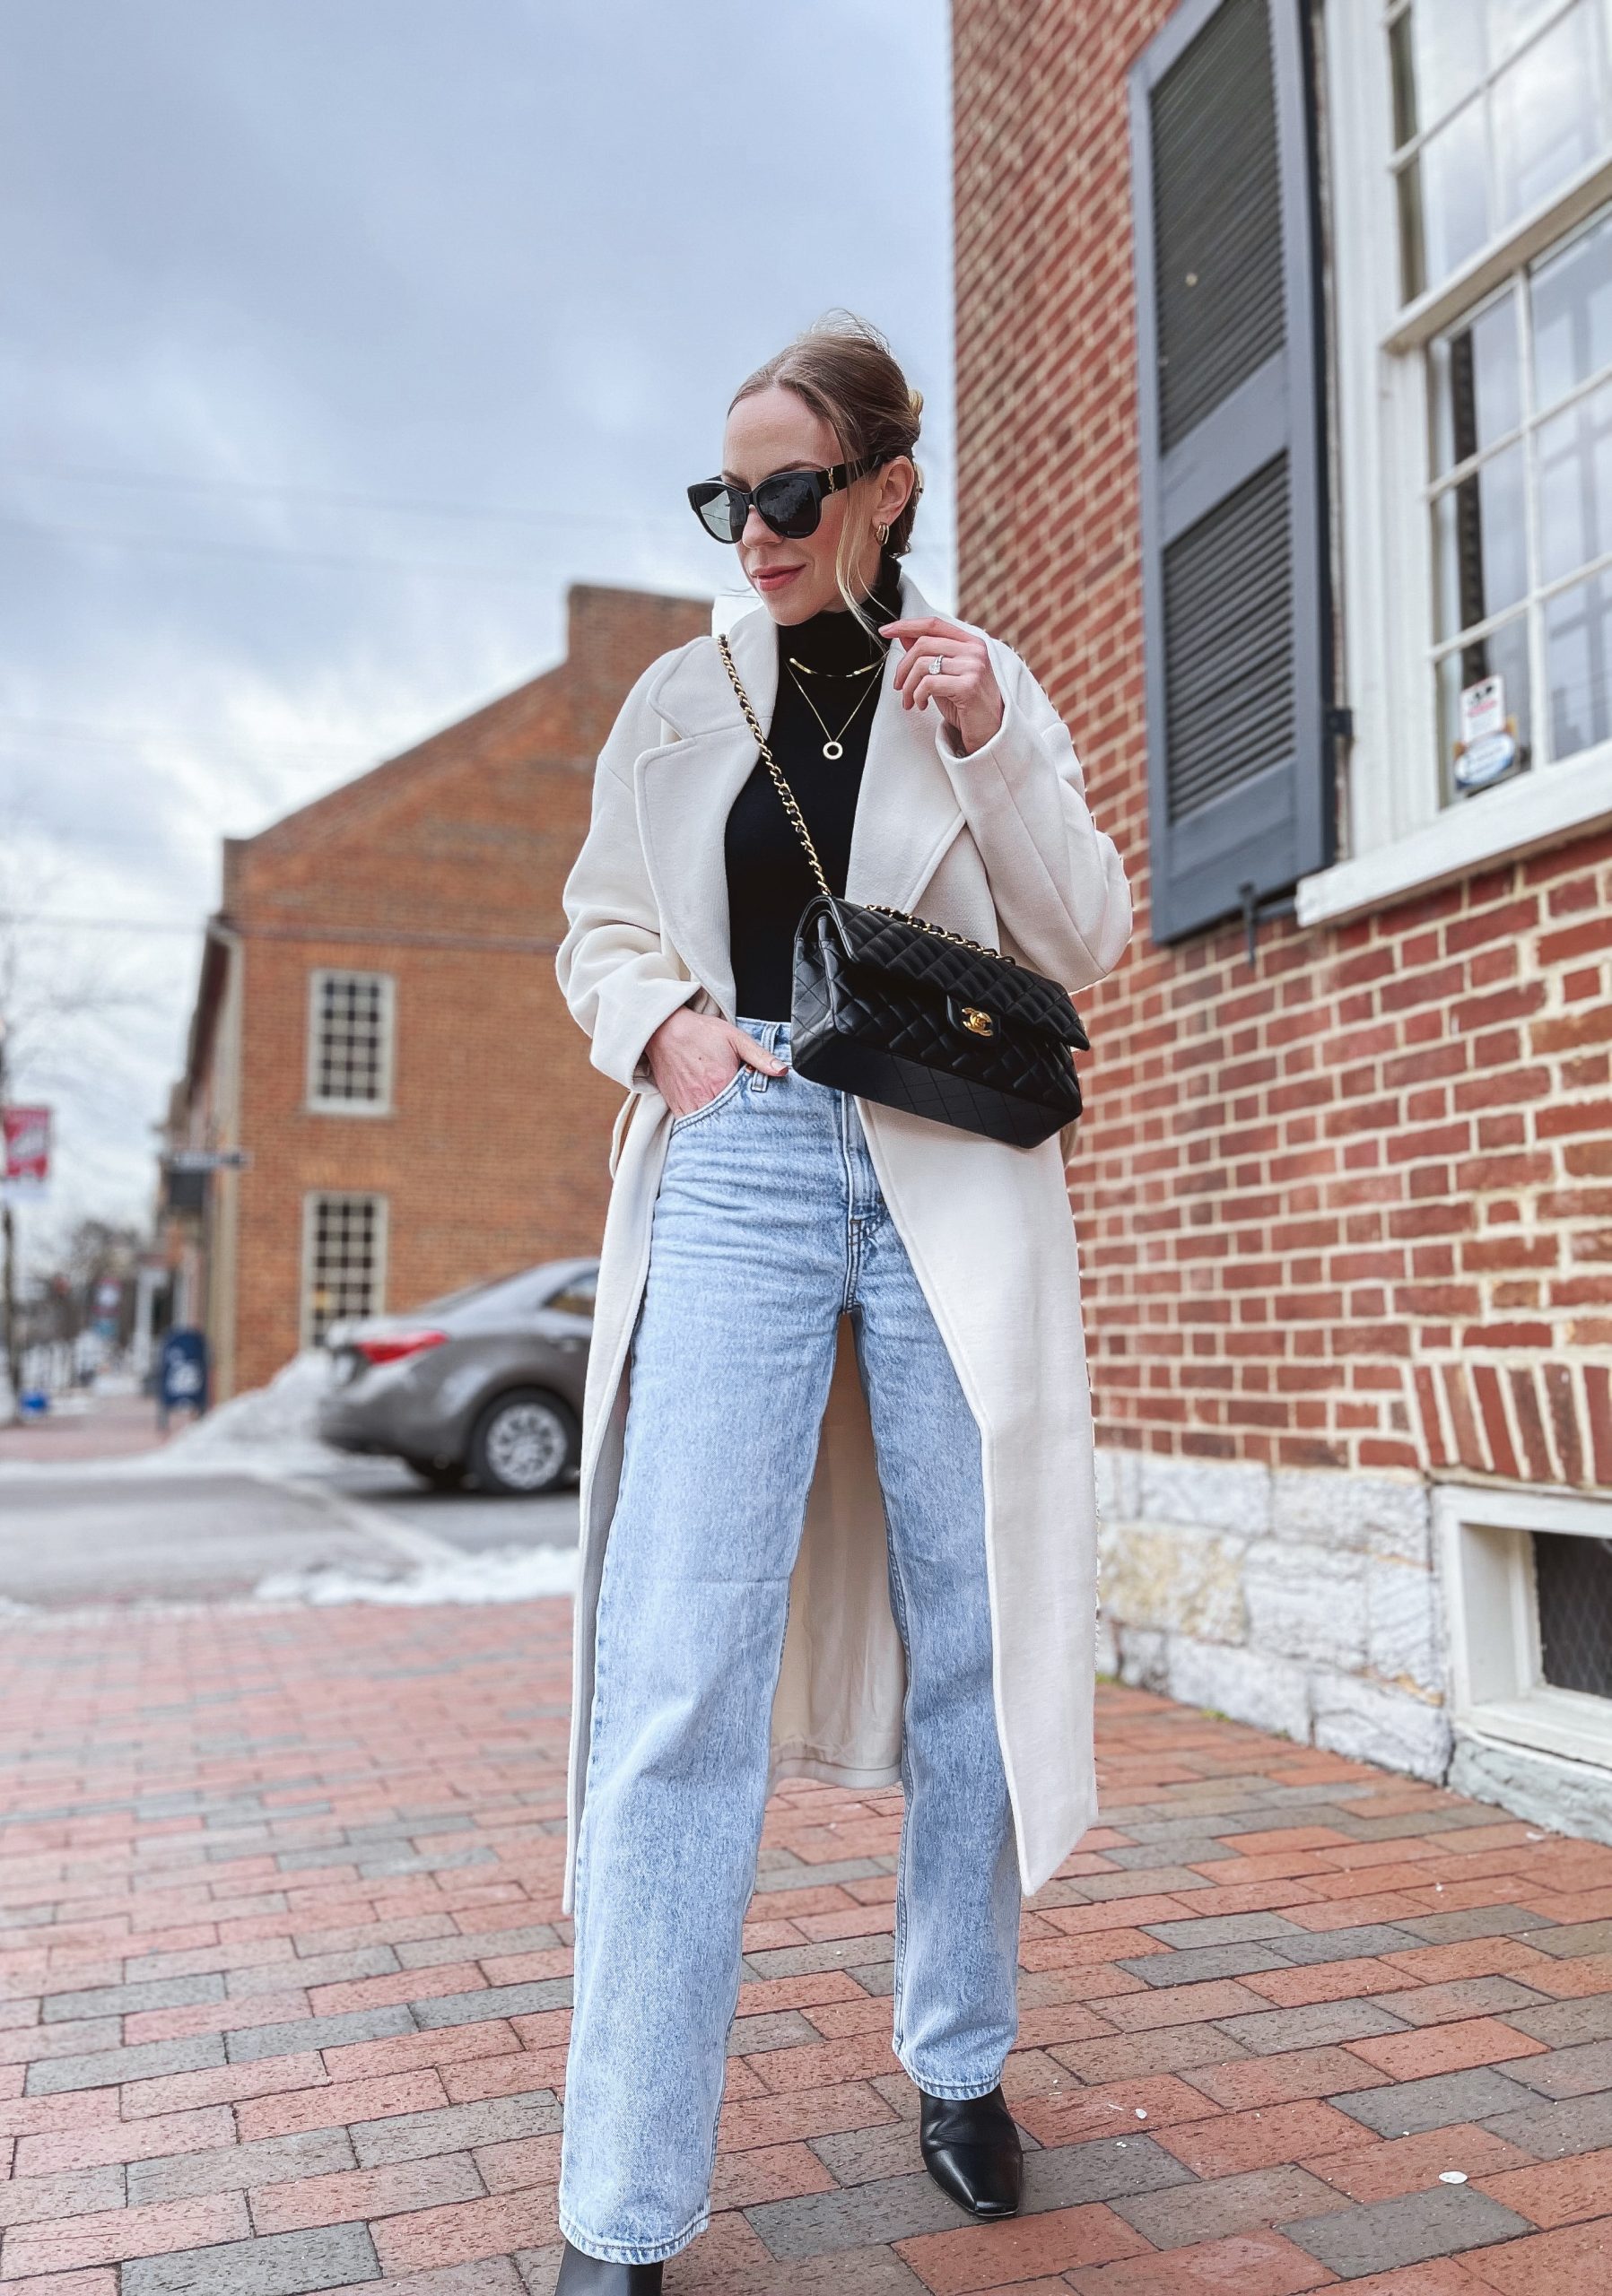 3 New Pairs of Jeans I\'m Loving & Key Denim Trends for Spring 2022 -  Meagan\'s Moda